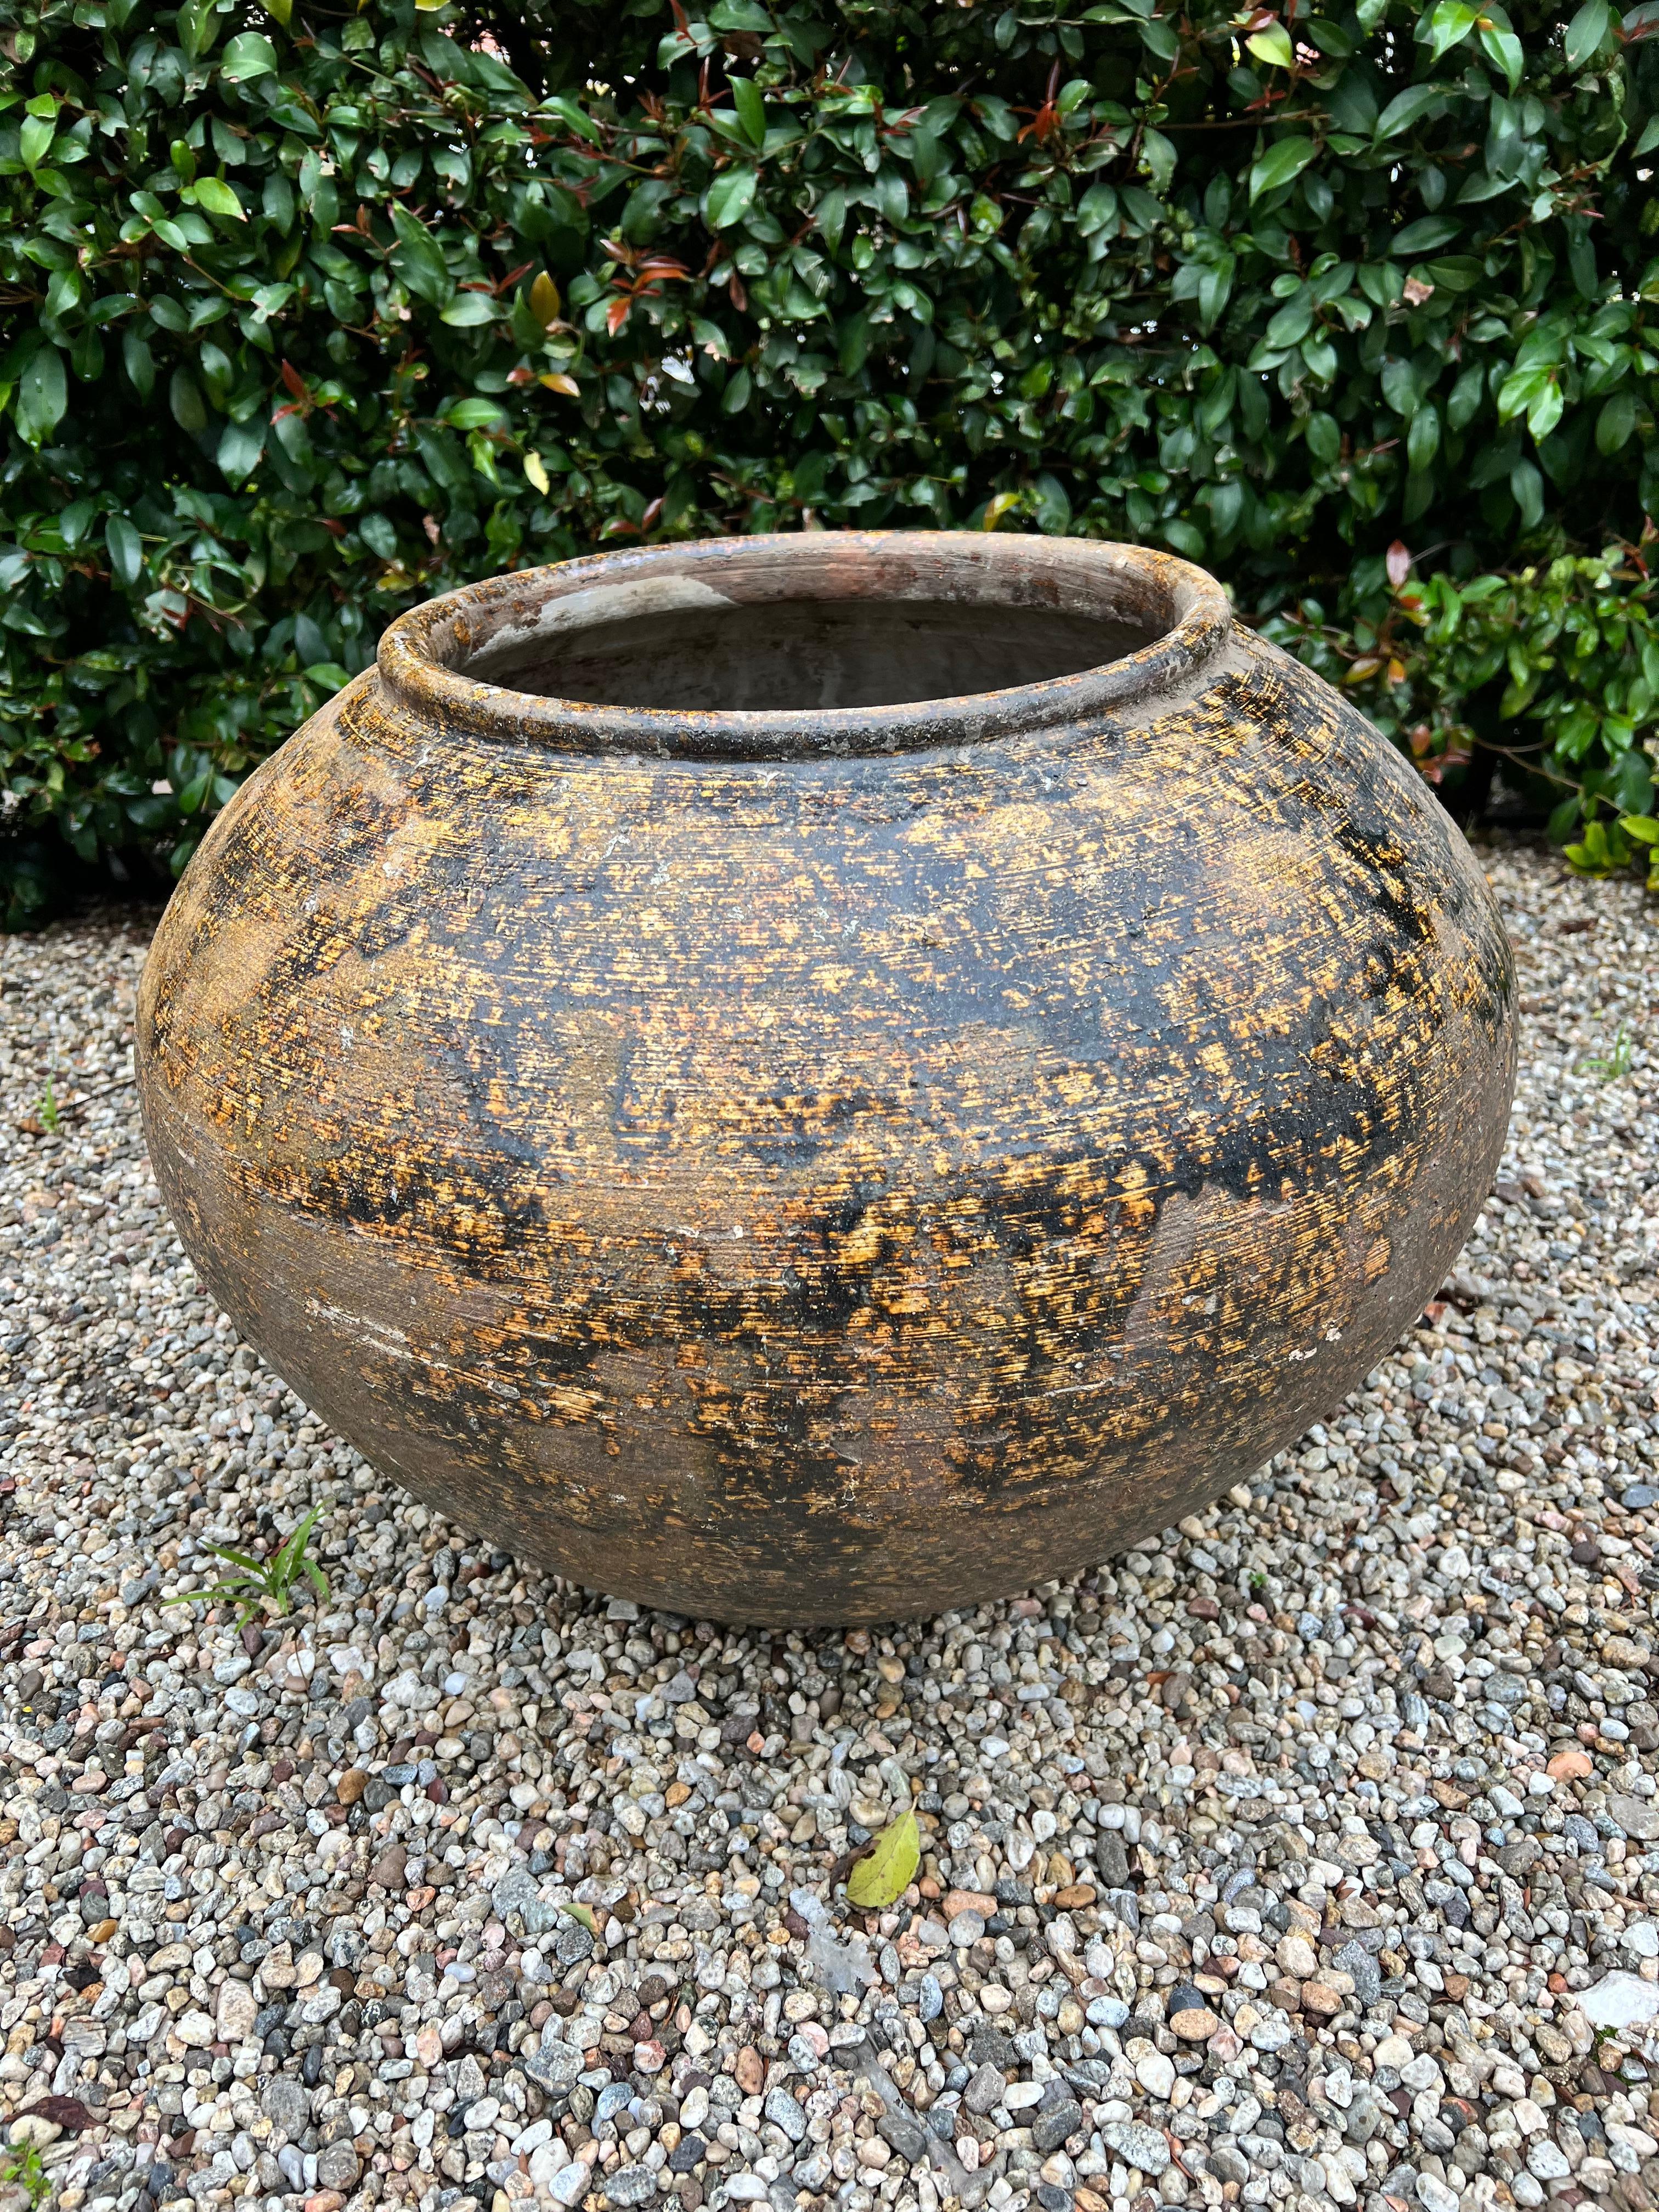 A wonderful large terracotta planter - the piece is a unique shape, with color and patinated glaze ideal for neutral interiors, and perfect for any garden or patio setting.

The size can handle a bush sized plant or a modest smaller tree like